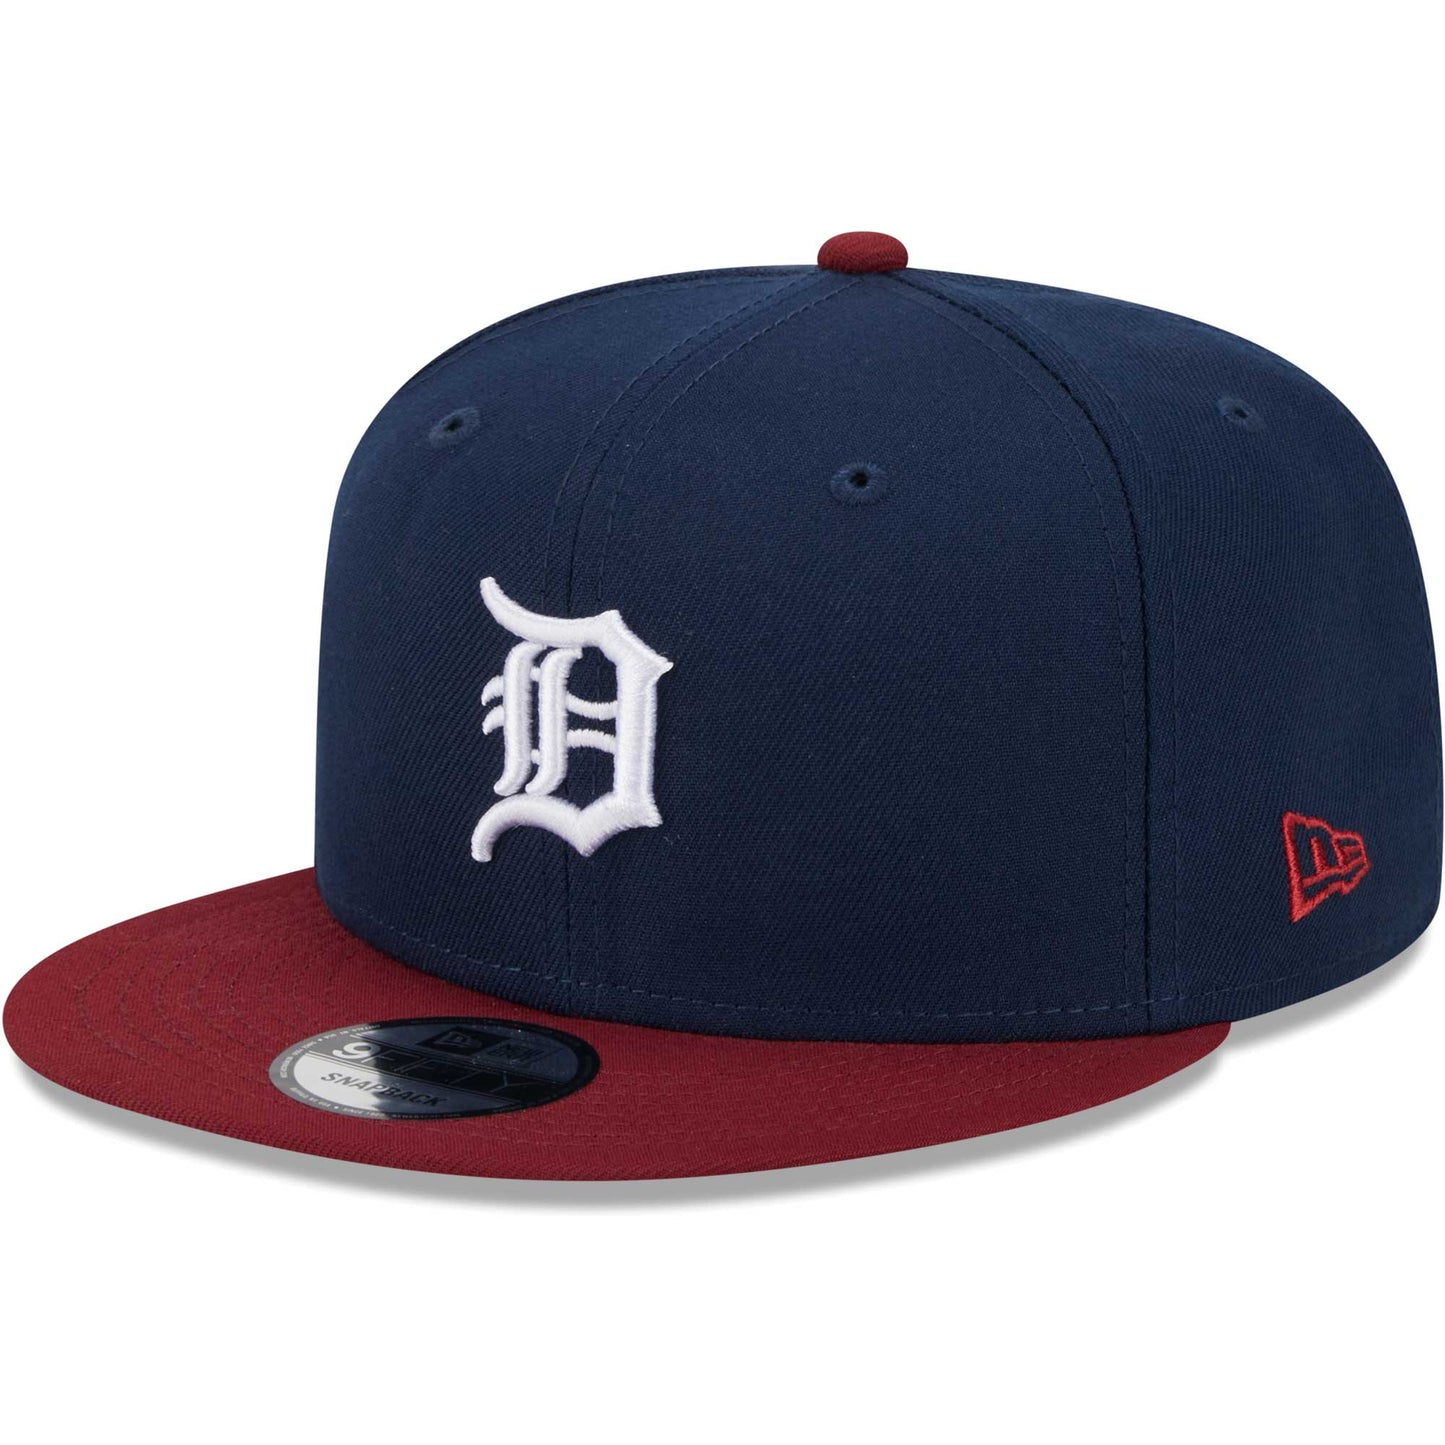 Detroit Tigers New Era Two-Tone Color Pack 9FIFTY Snapback Hat - Navy